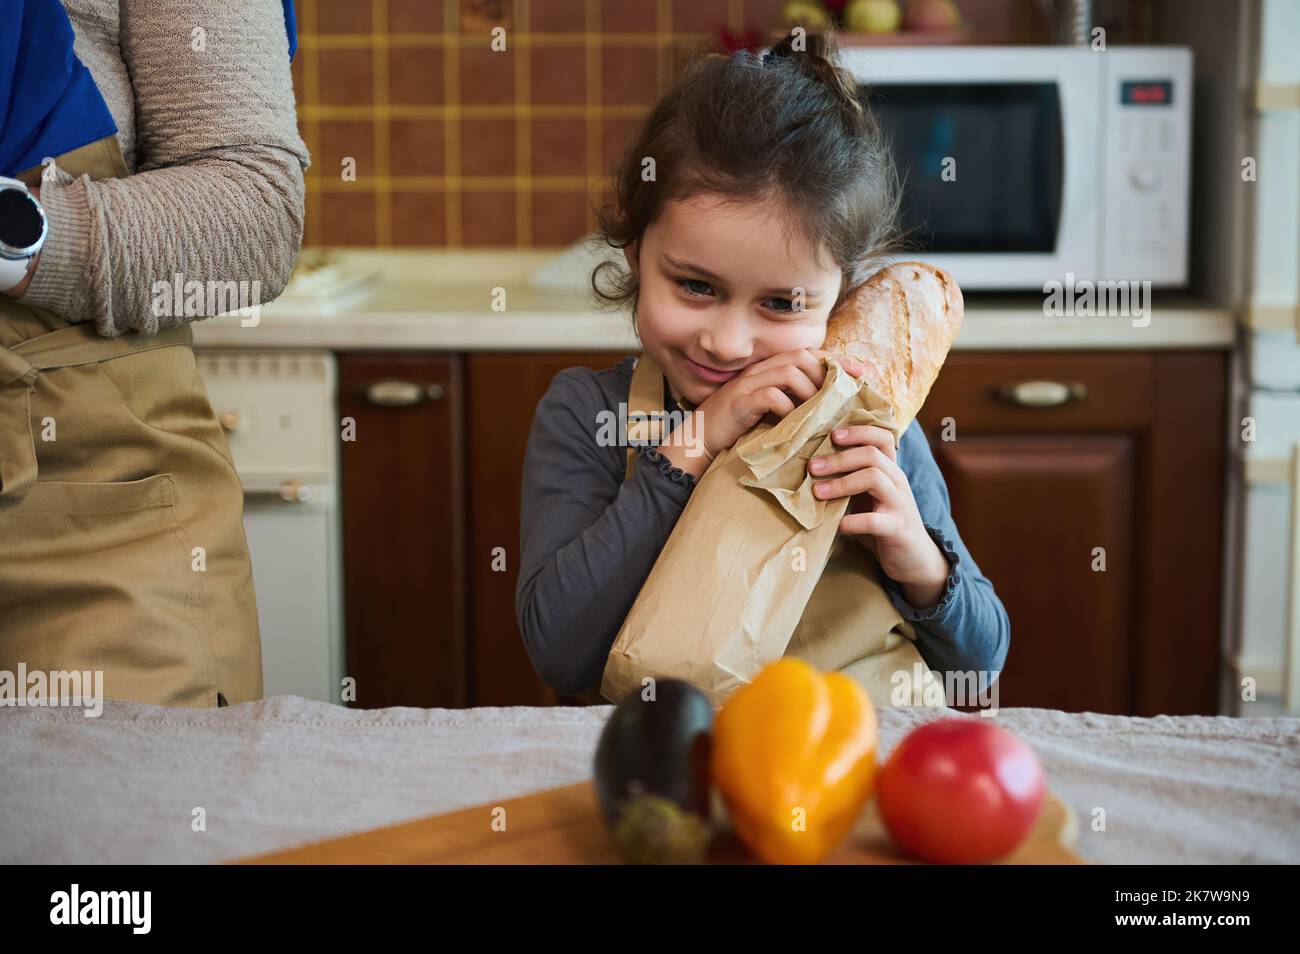 Adorable baby girl holds a hot baguette of freshly baked whole grain sourdough bread, in the kitchen with rustic design Stock Photo